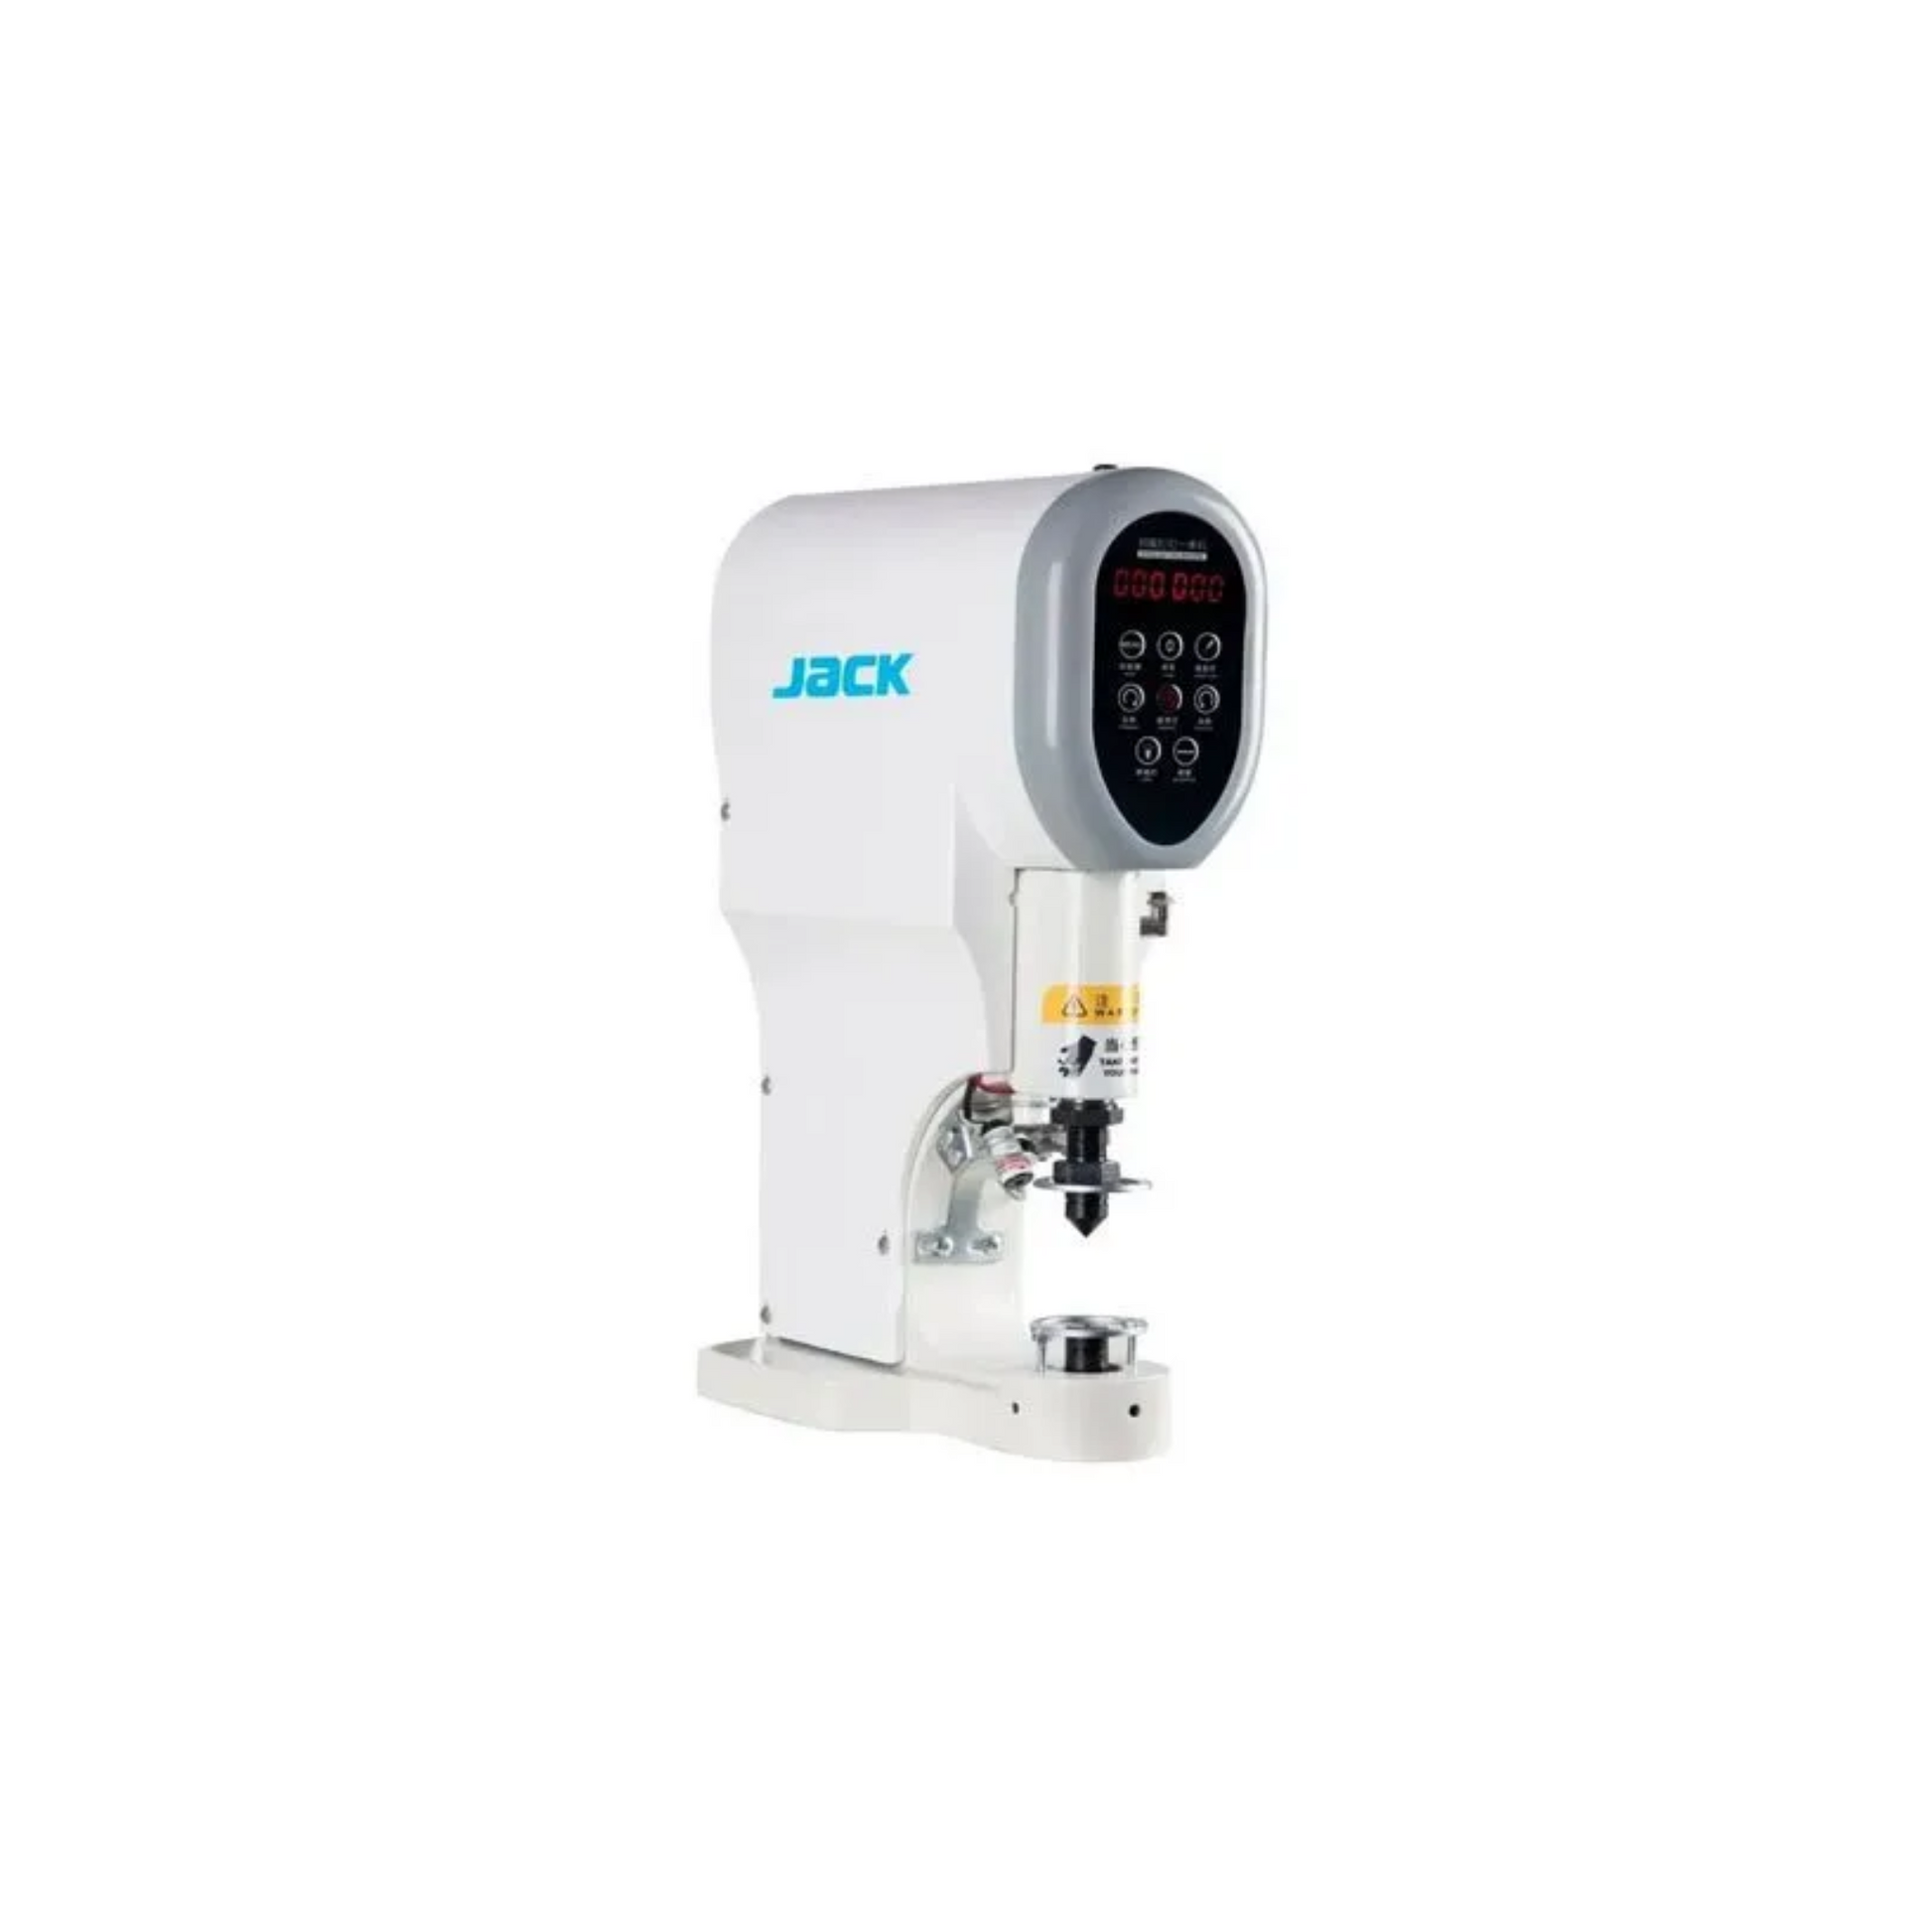 Jack 818 - Sewing machine - White - Front view